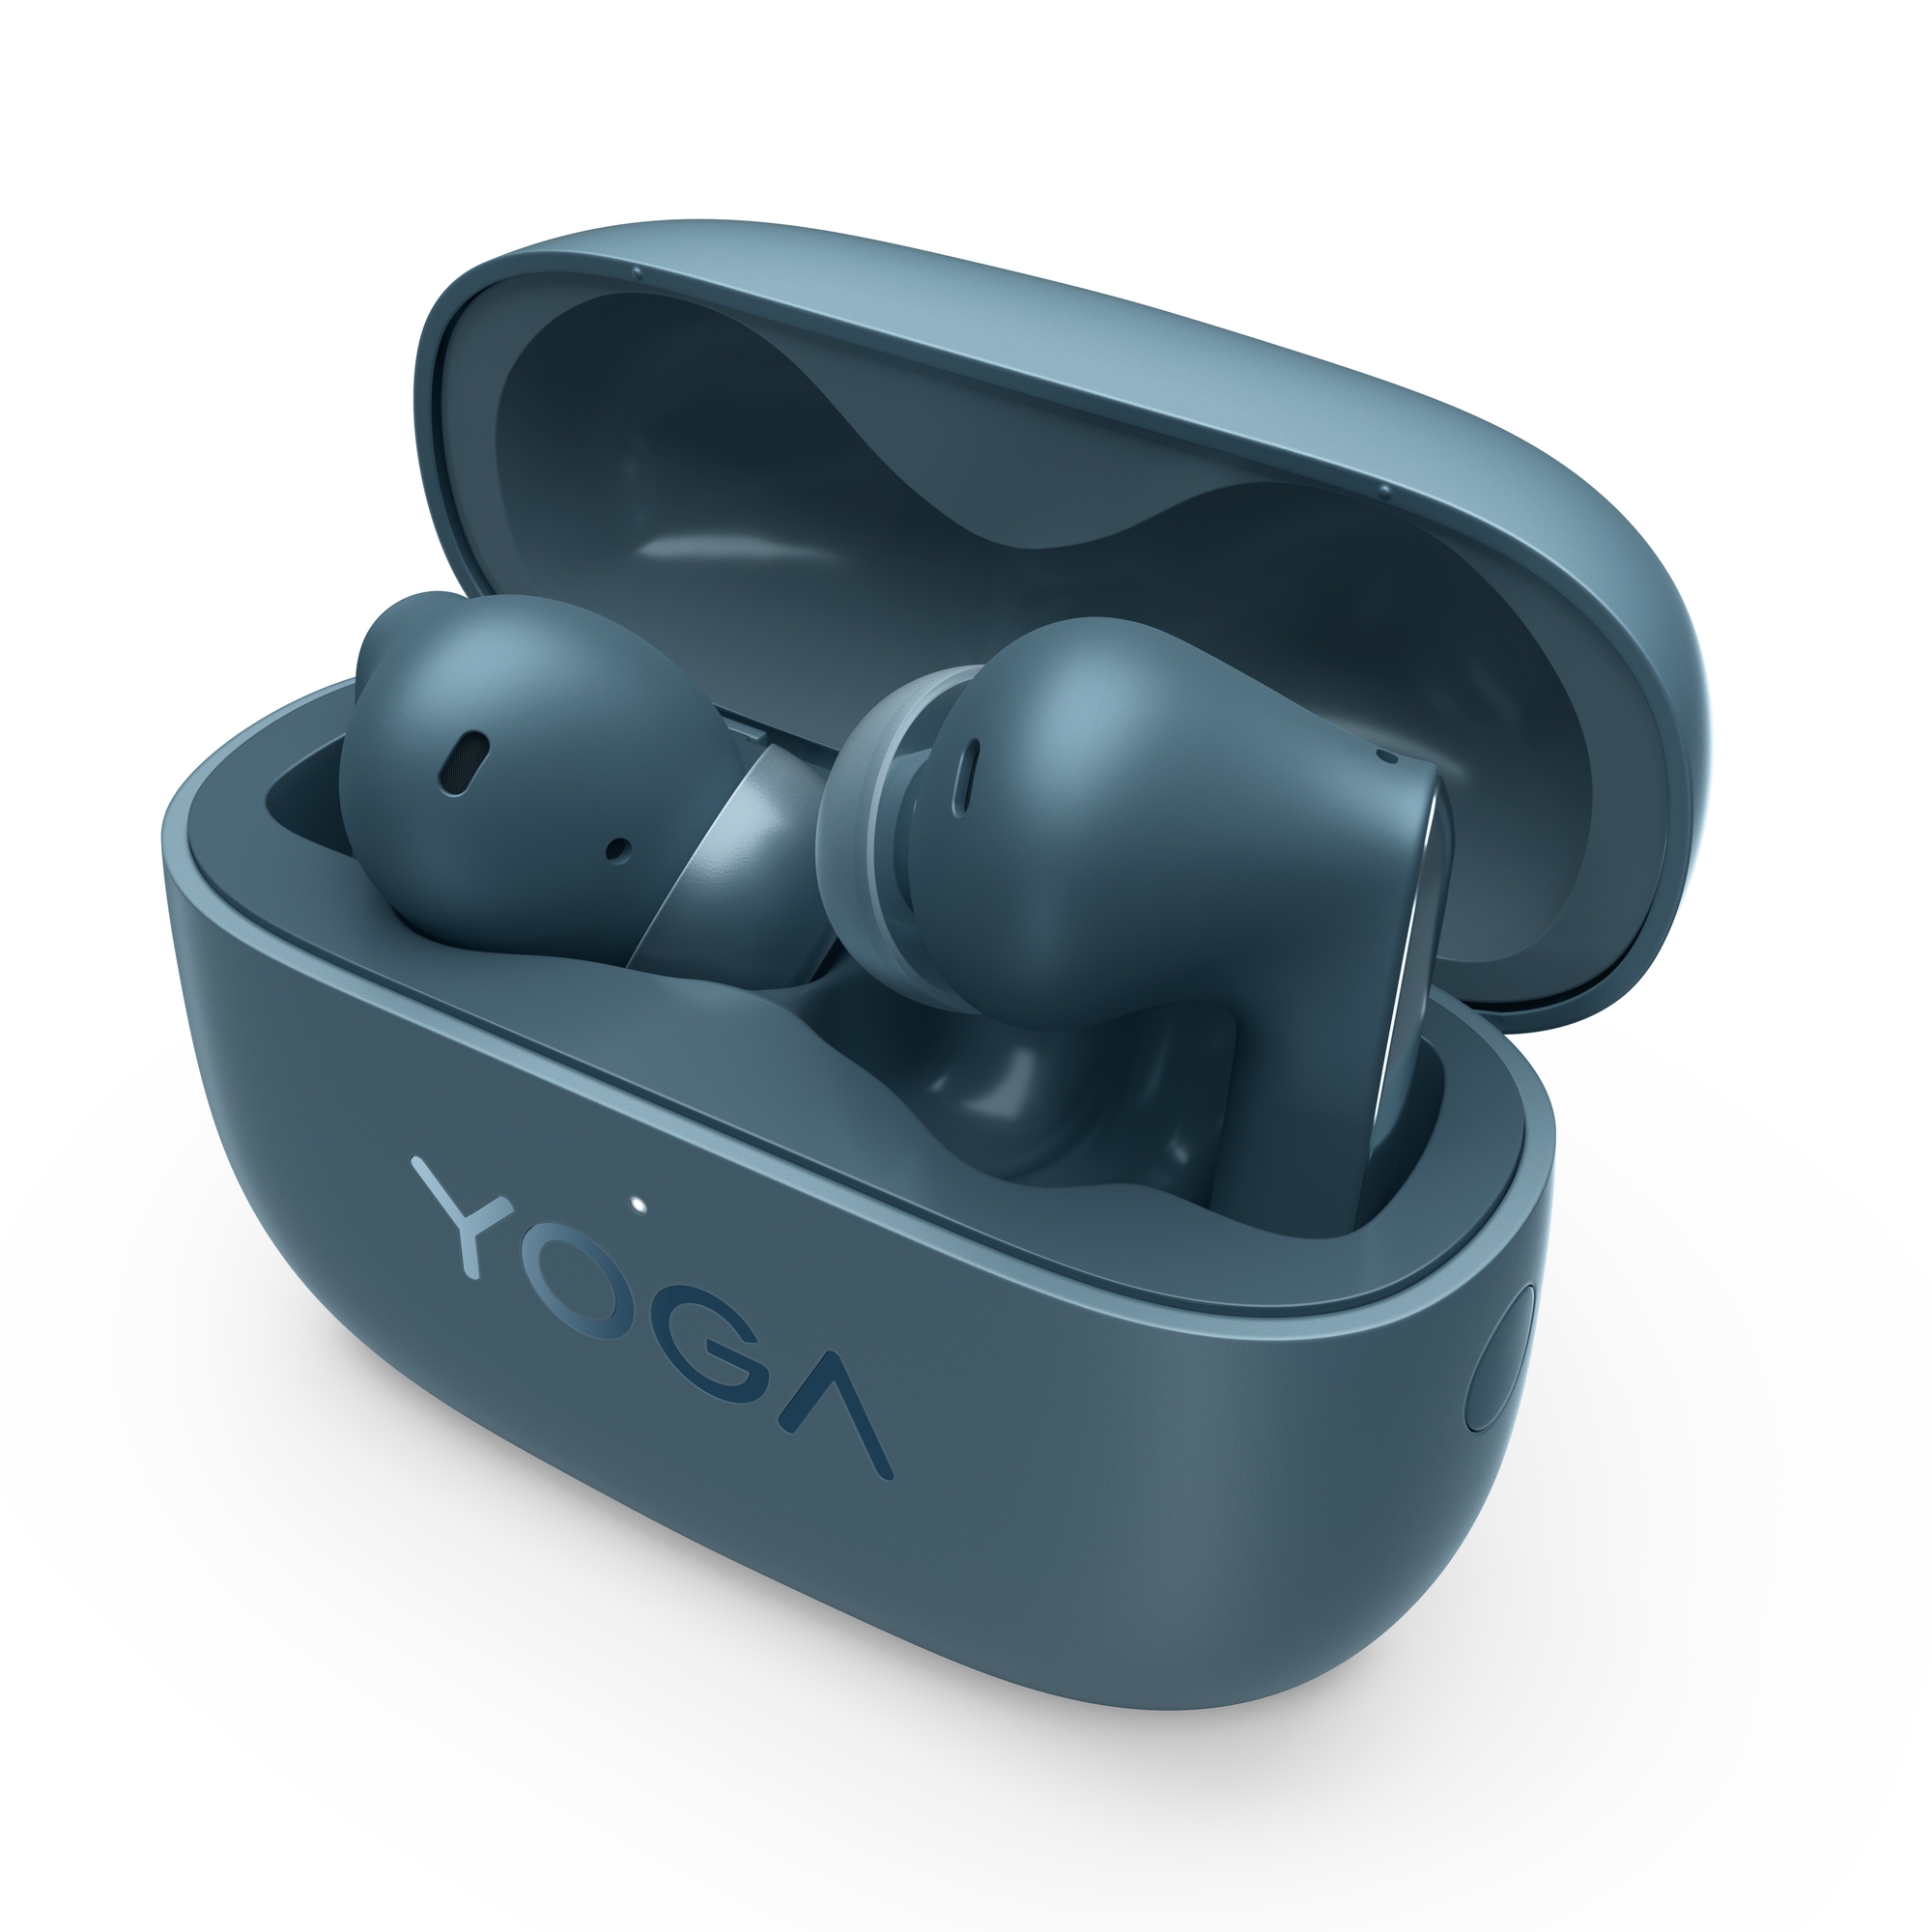 05-True-Wireless-Stereo-Earbuds-45-degree-right-view-inside-the-box.jpg